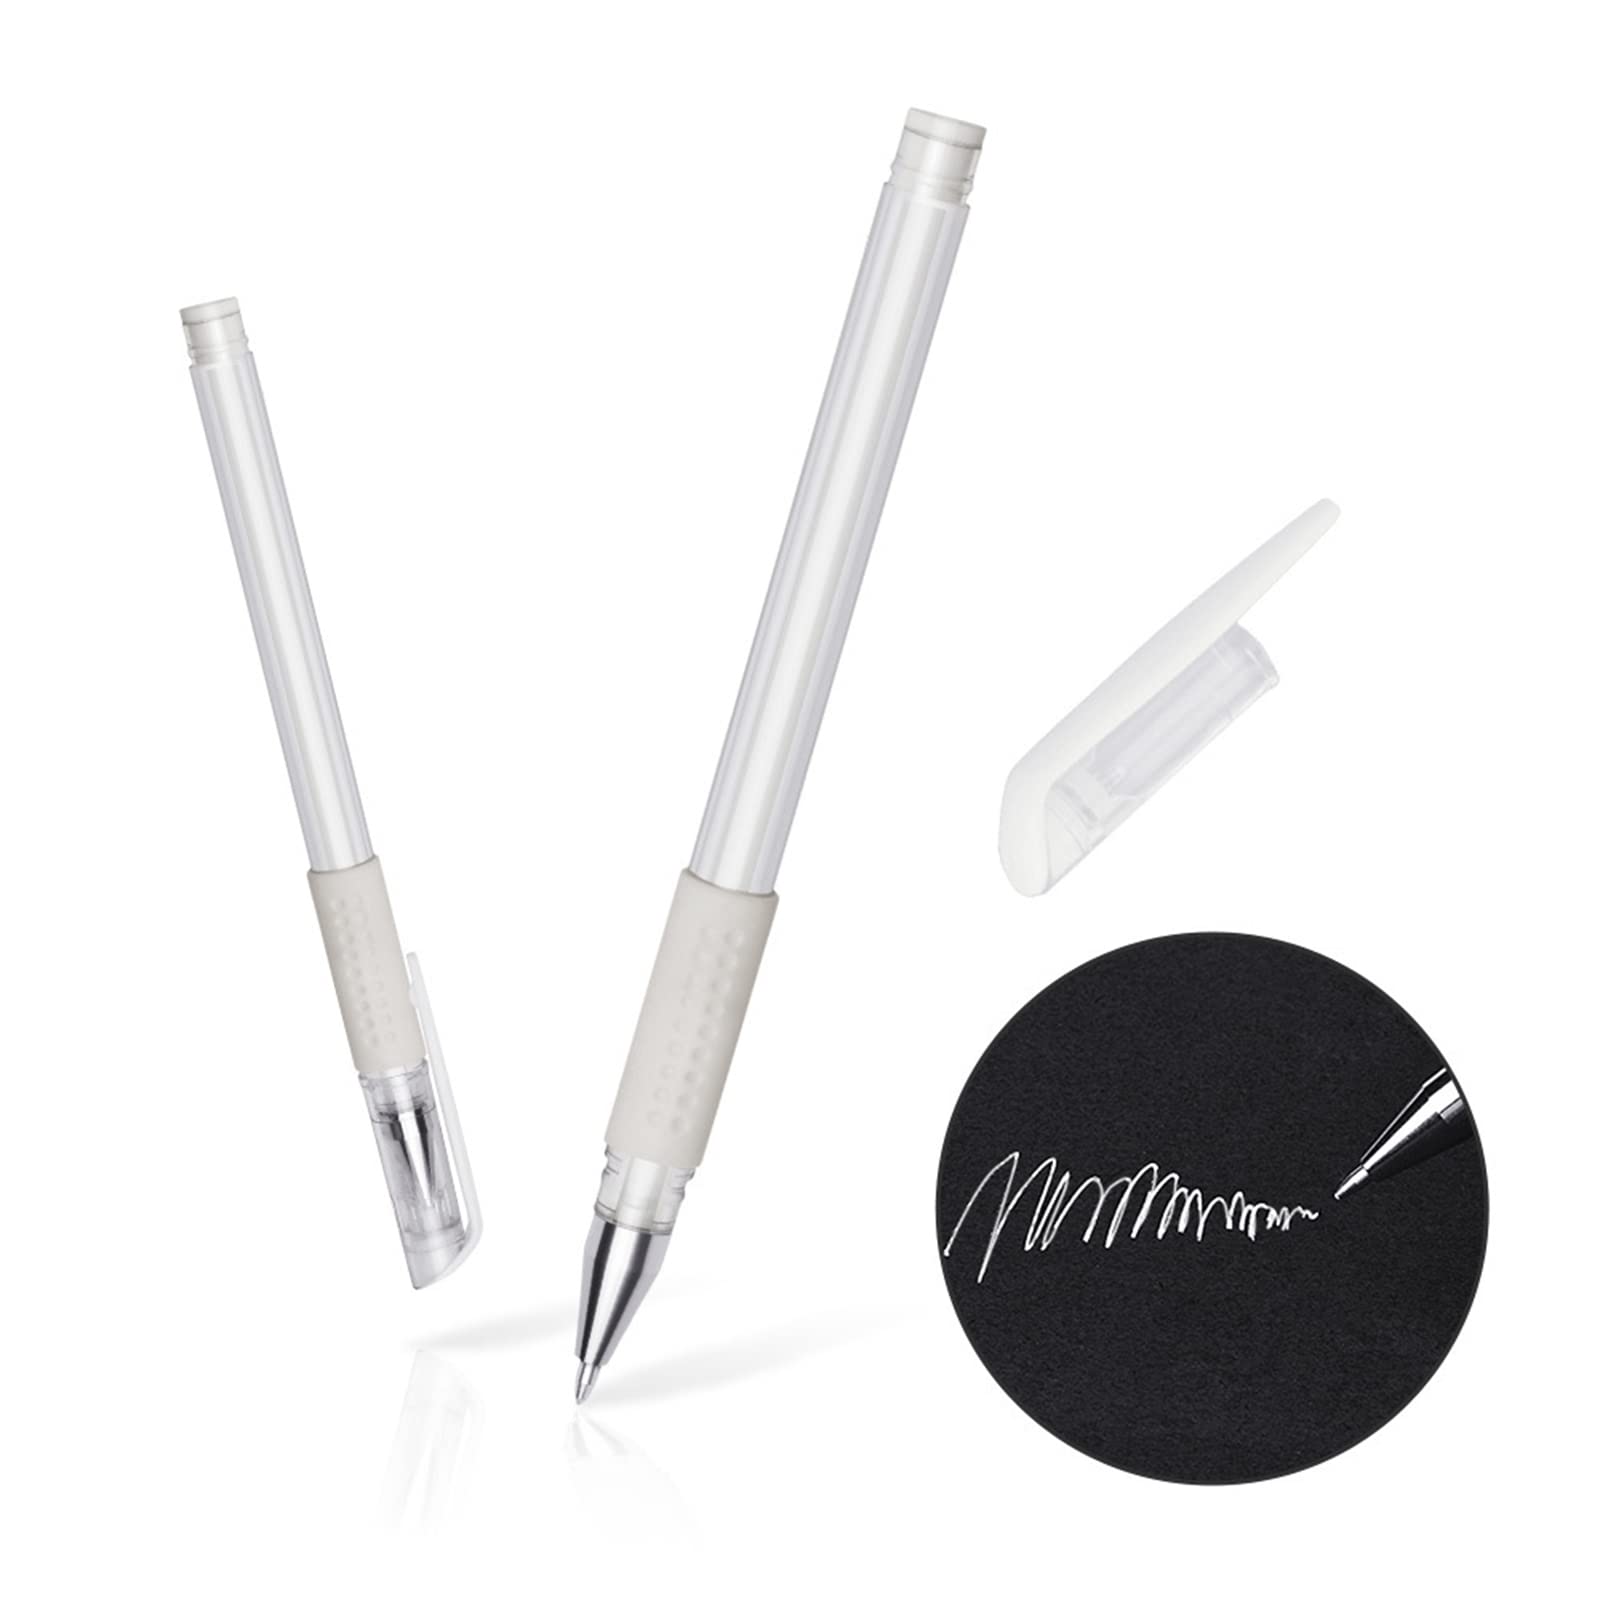 Eyebrow Marker Pen Pink Microblading Eyebrow Mapping Pen Brow Lip Permanent Makeup Position Mapping Mark Tools (2pcs White)